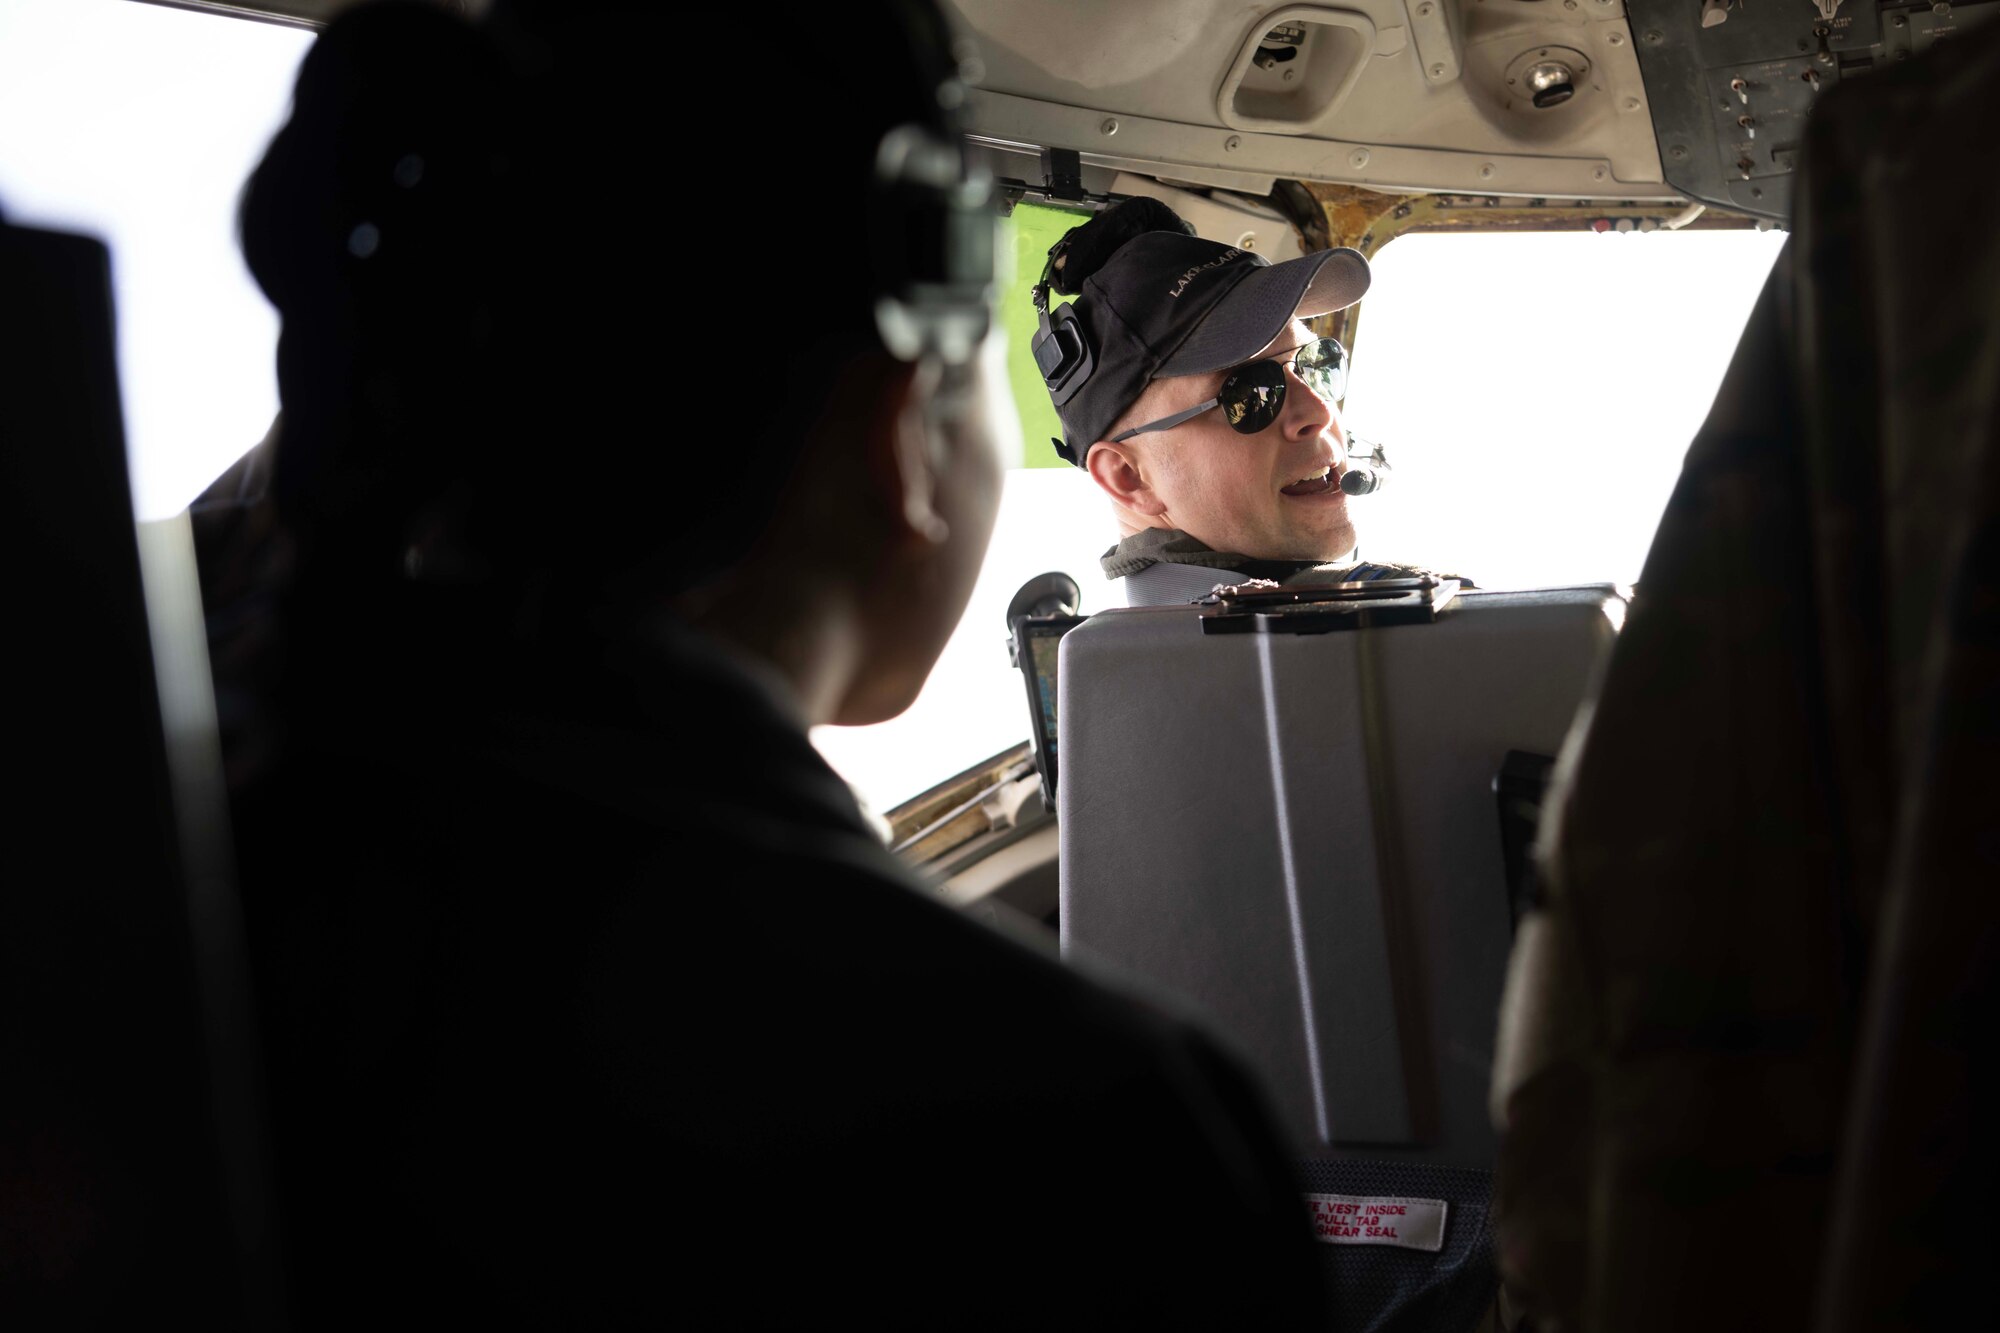 An Airman sits in the copilot seat of a military aircraft